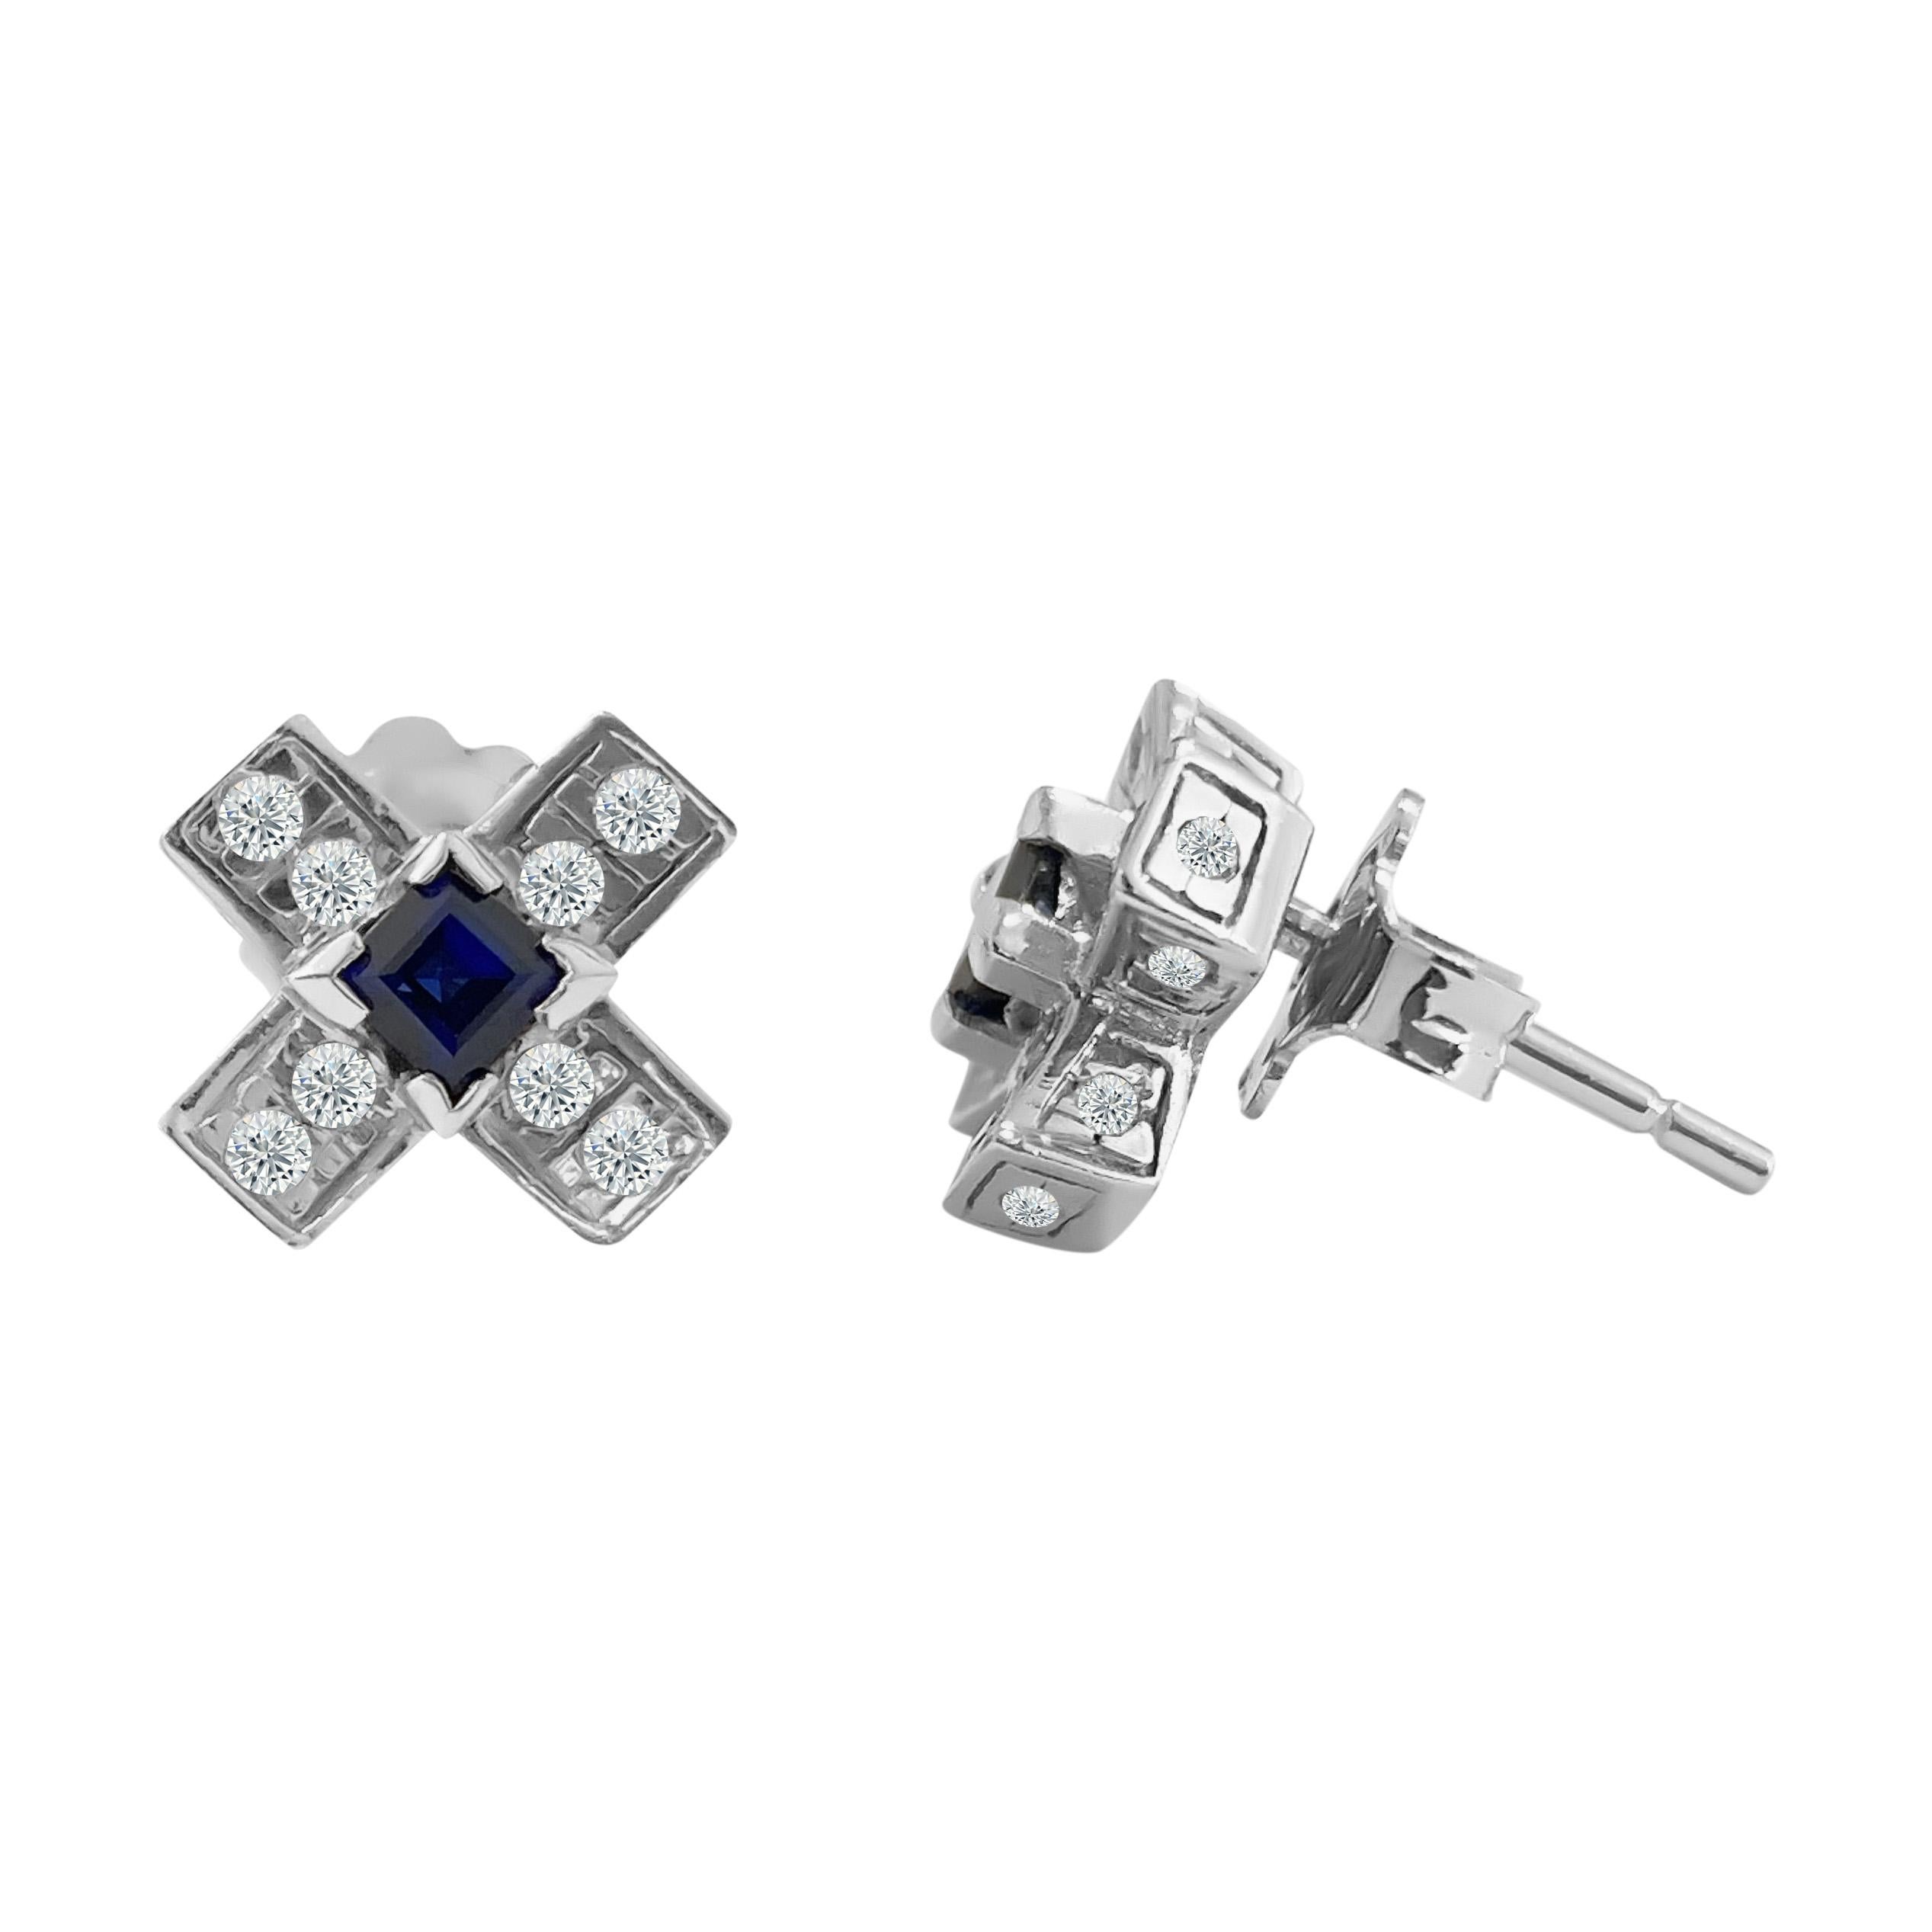 Metal: 14k white gold. 

Diamonds:  0.60 cwt. VS clarity and G color. Round brilliant cut diamonds. 
100% natural earth mined 

Blue sapphire: 0.40 cwt. Princess cut set in prongs. 100% natural earth mined. 

TCW of all stones: 1.00